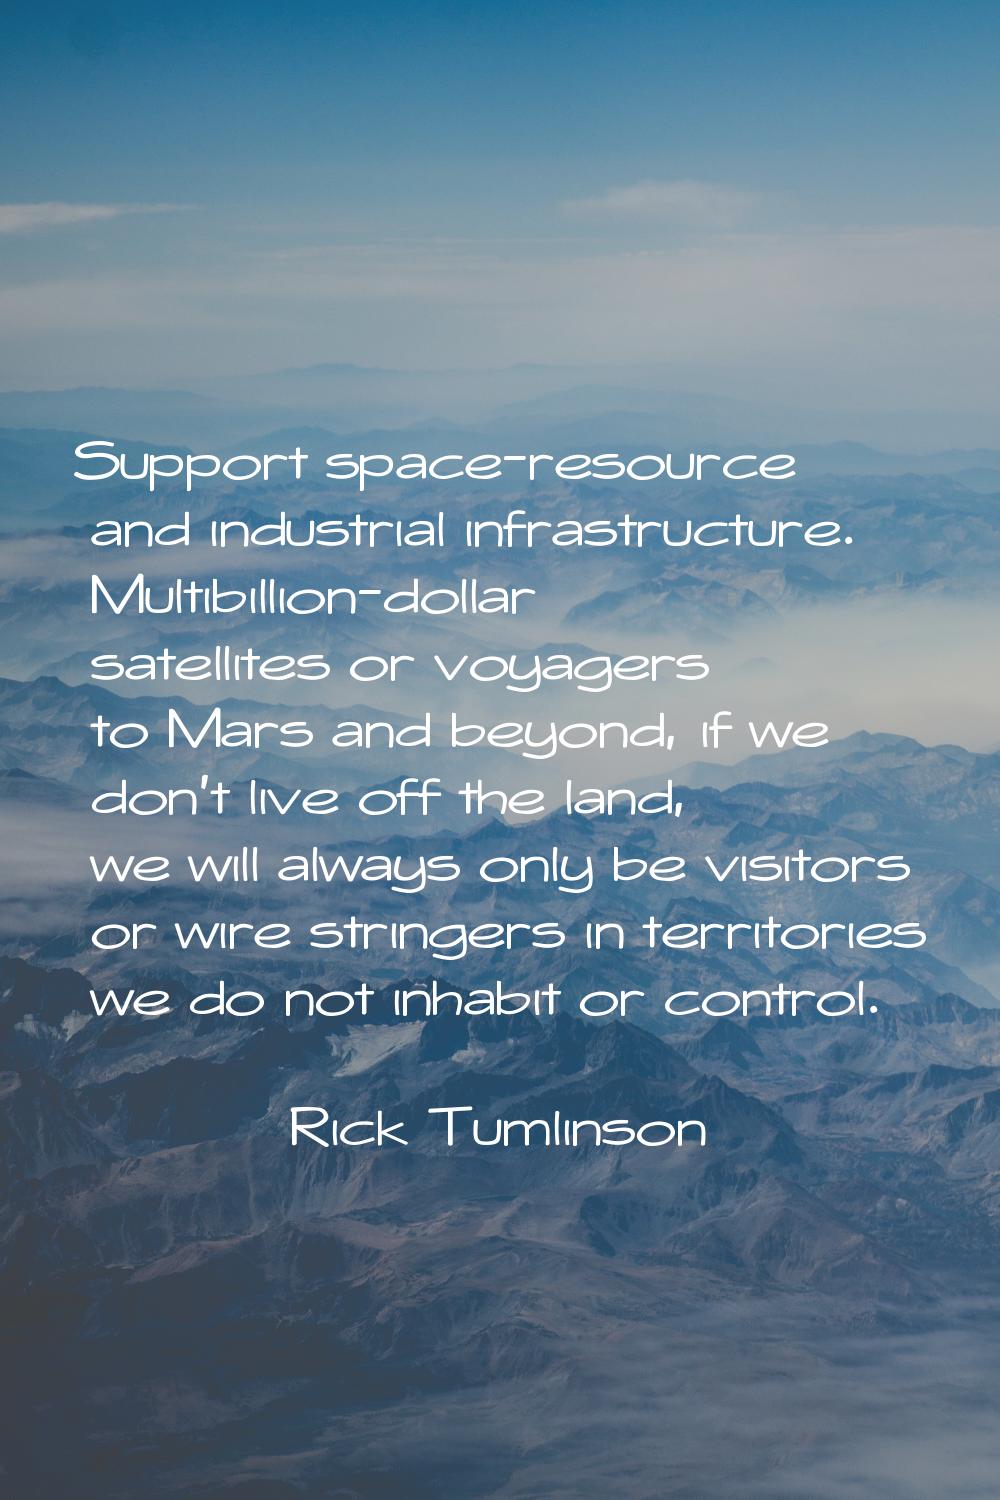 Support space-resource and industrial infrastructure. Multibillion-dollar satellites or voyagers to